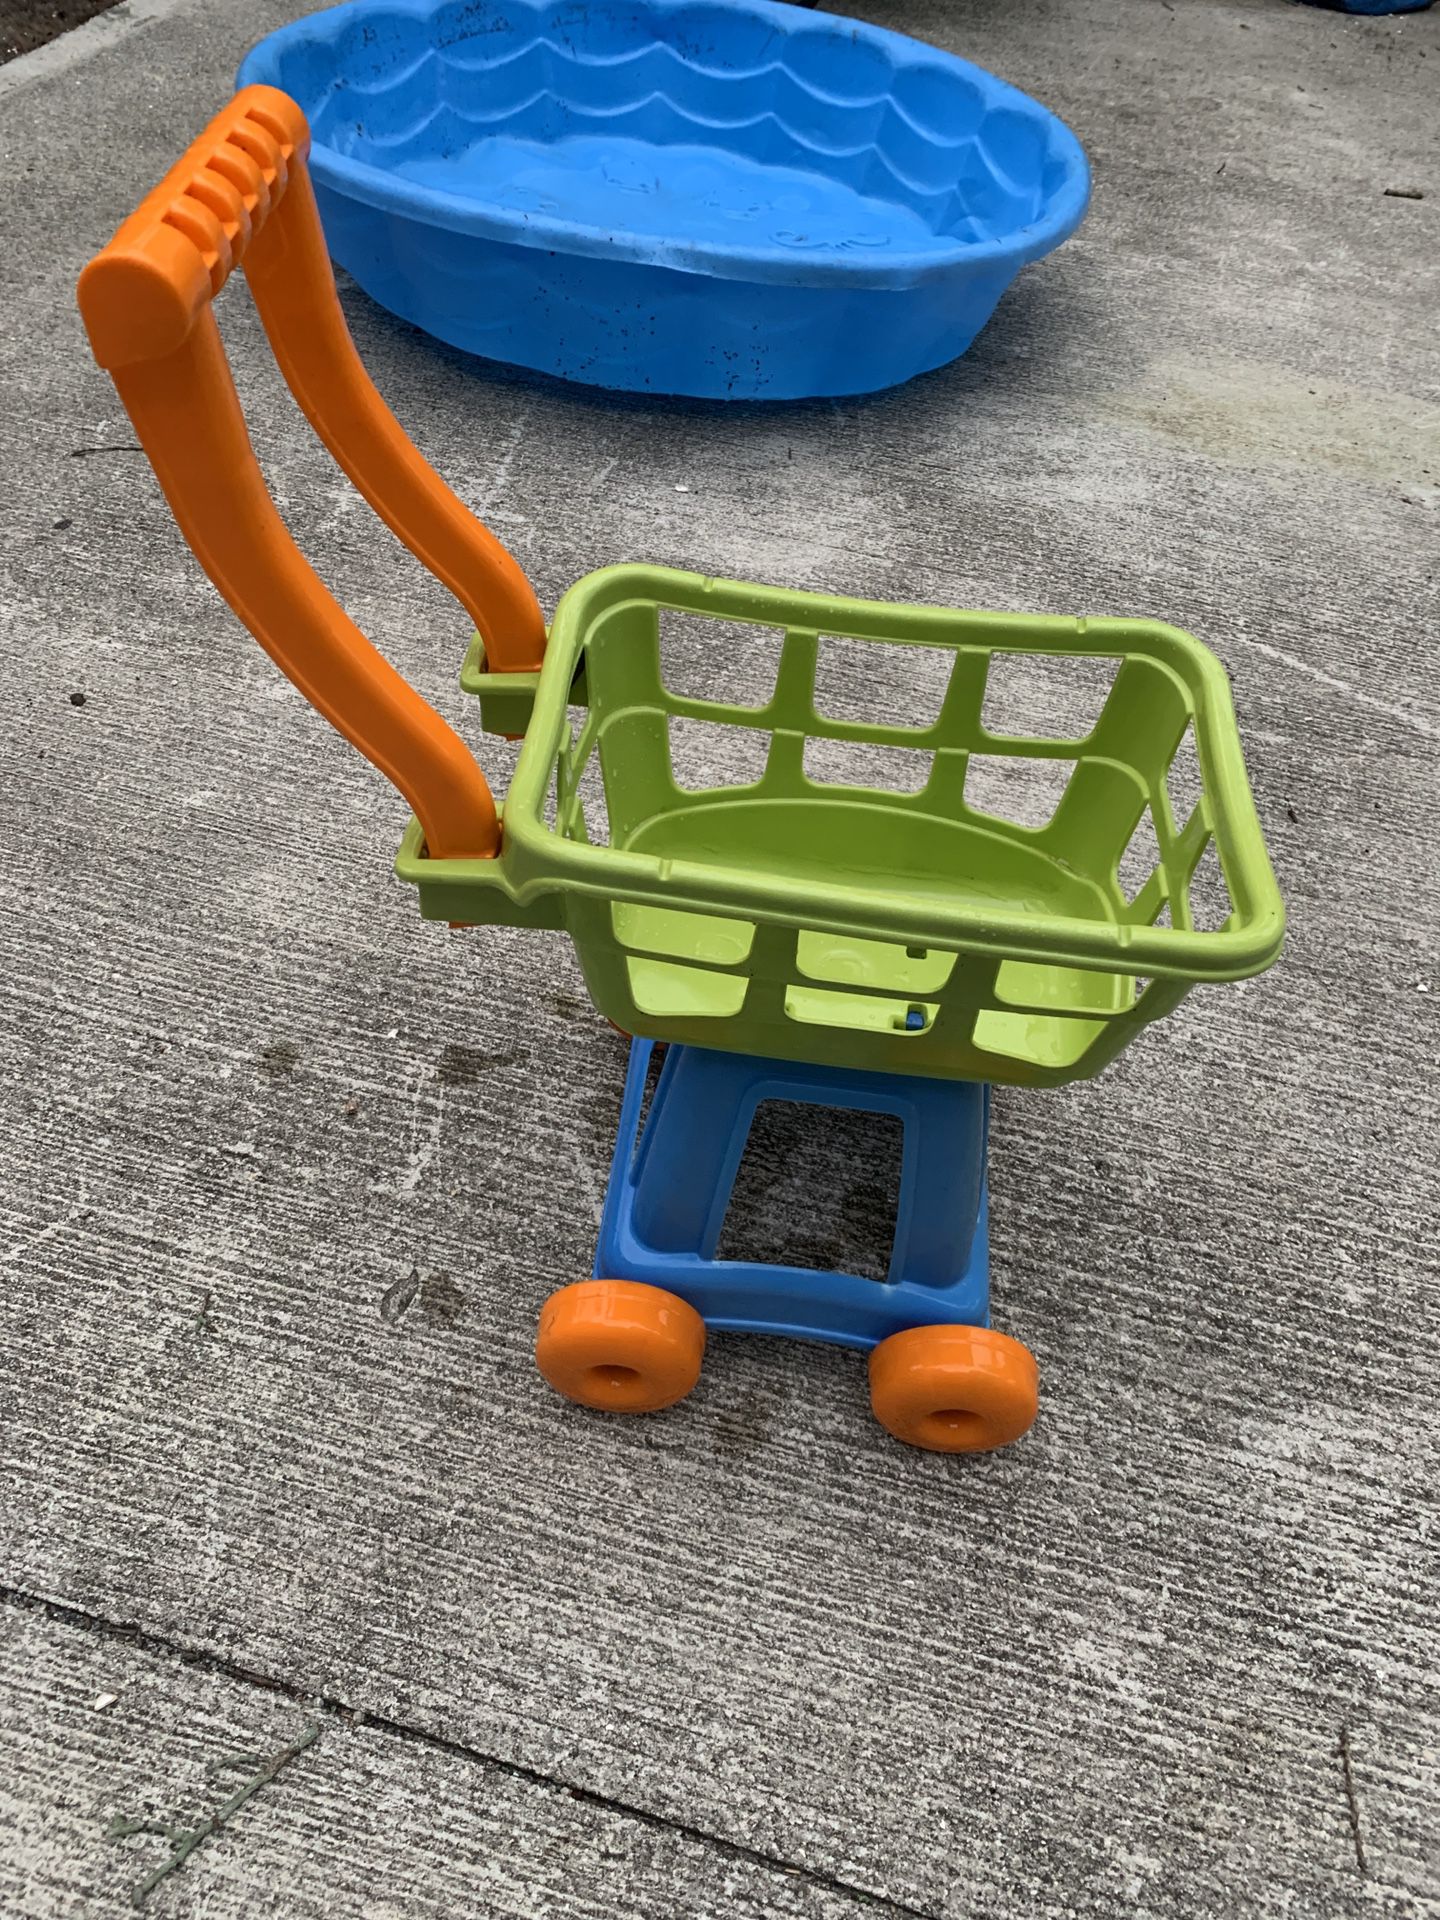 Kids toddler baby shopping cart play food activity toy